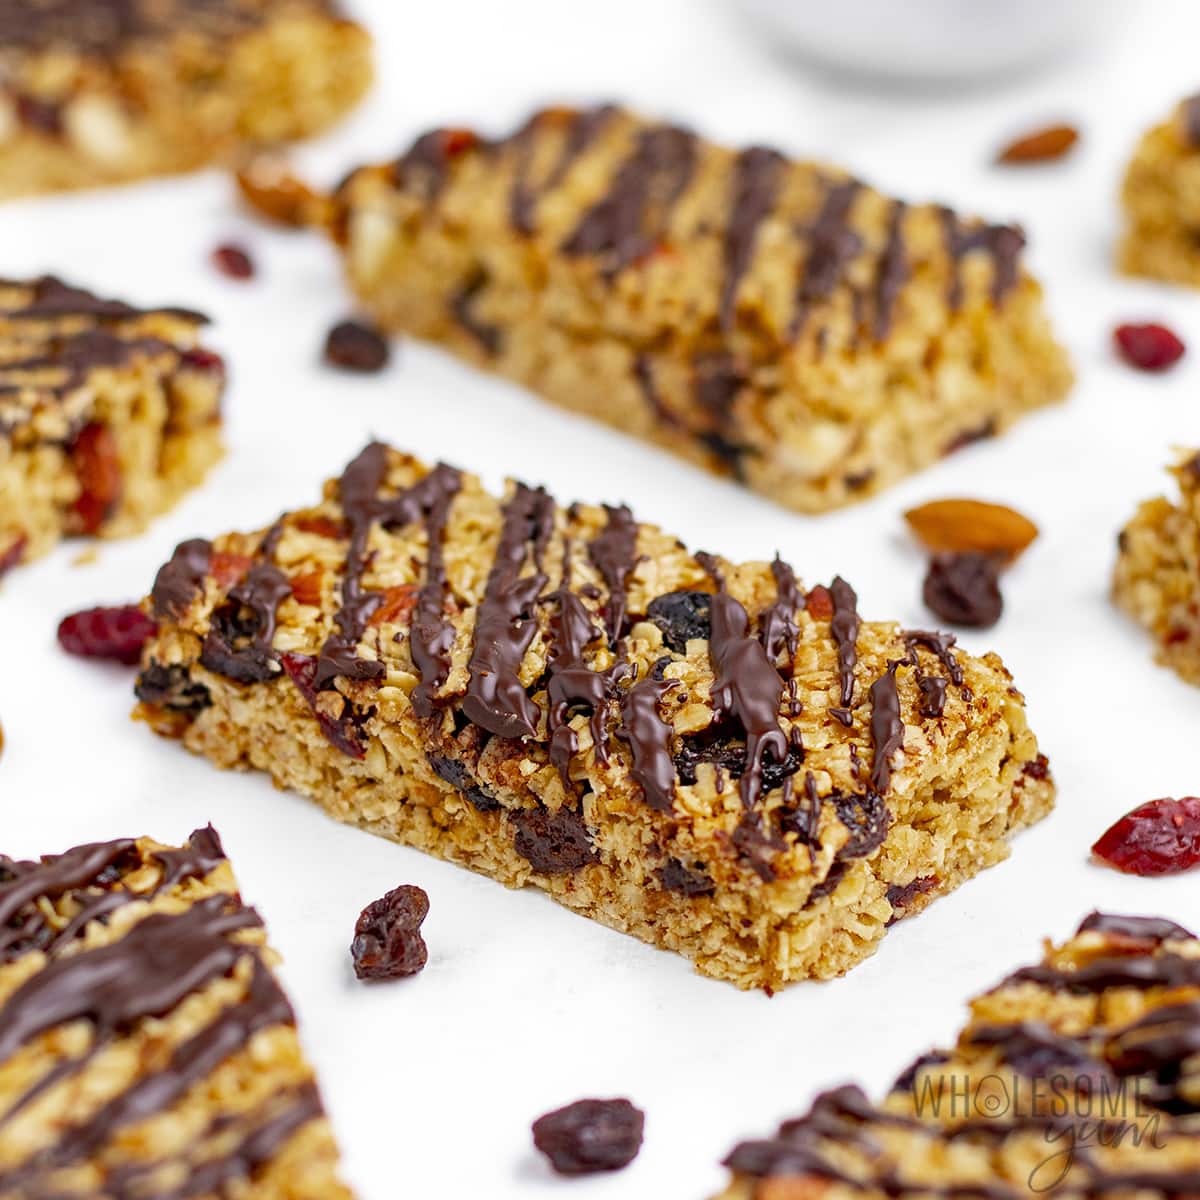 Sliced oatmeal bars recipe on parchment paper scattered with dried fruit.